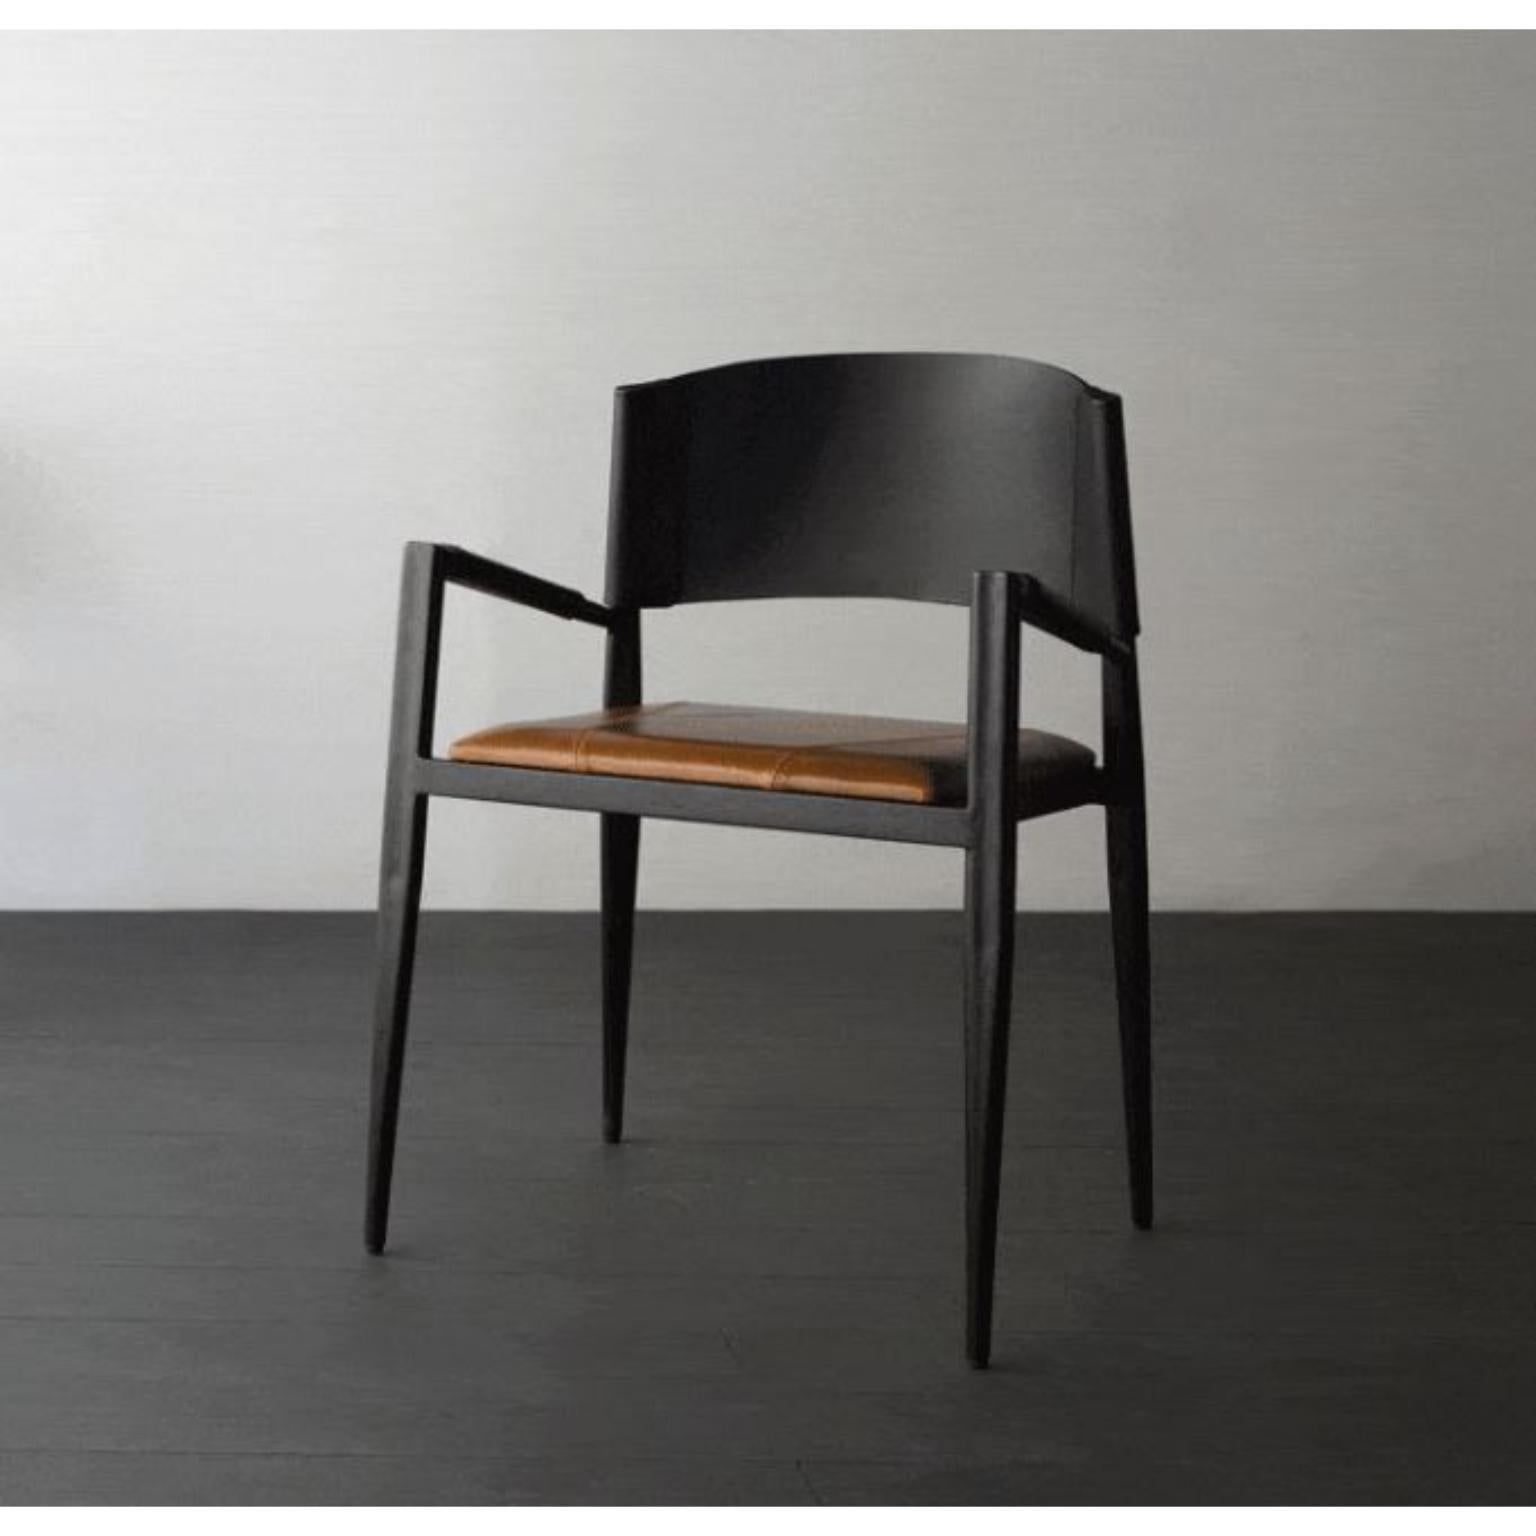 Ale Chair with Arms by Doimo Brasil
Dimensions: W 56 x D 55 x H 78 cm 
Materials: Metal, Natural leather with upholstered seat.


With the intention of providing good taste and personality, Doimo deciphers trends and follows the evolution of man and